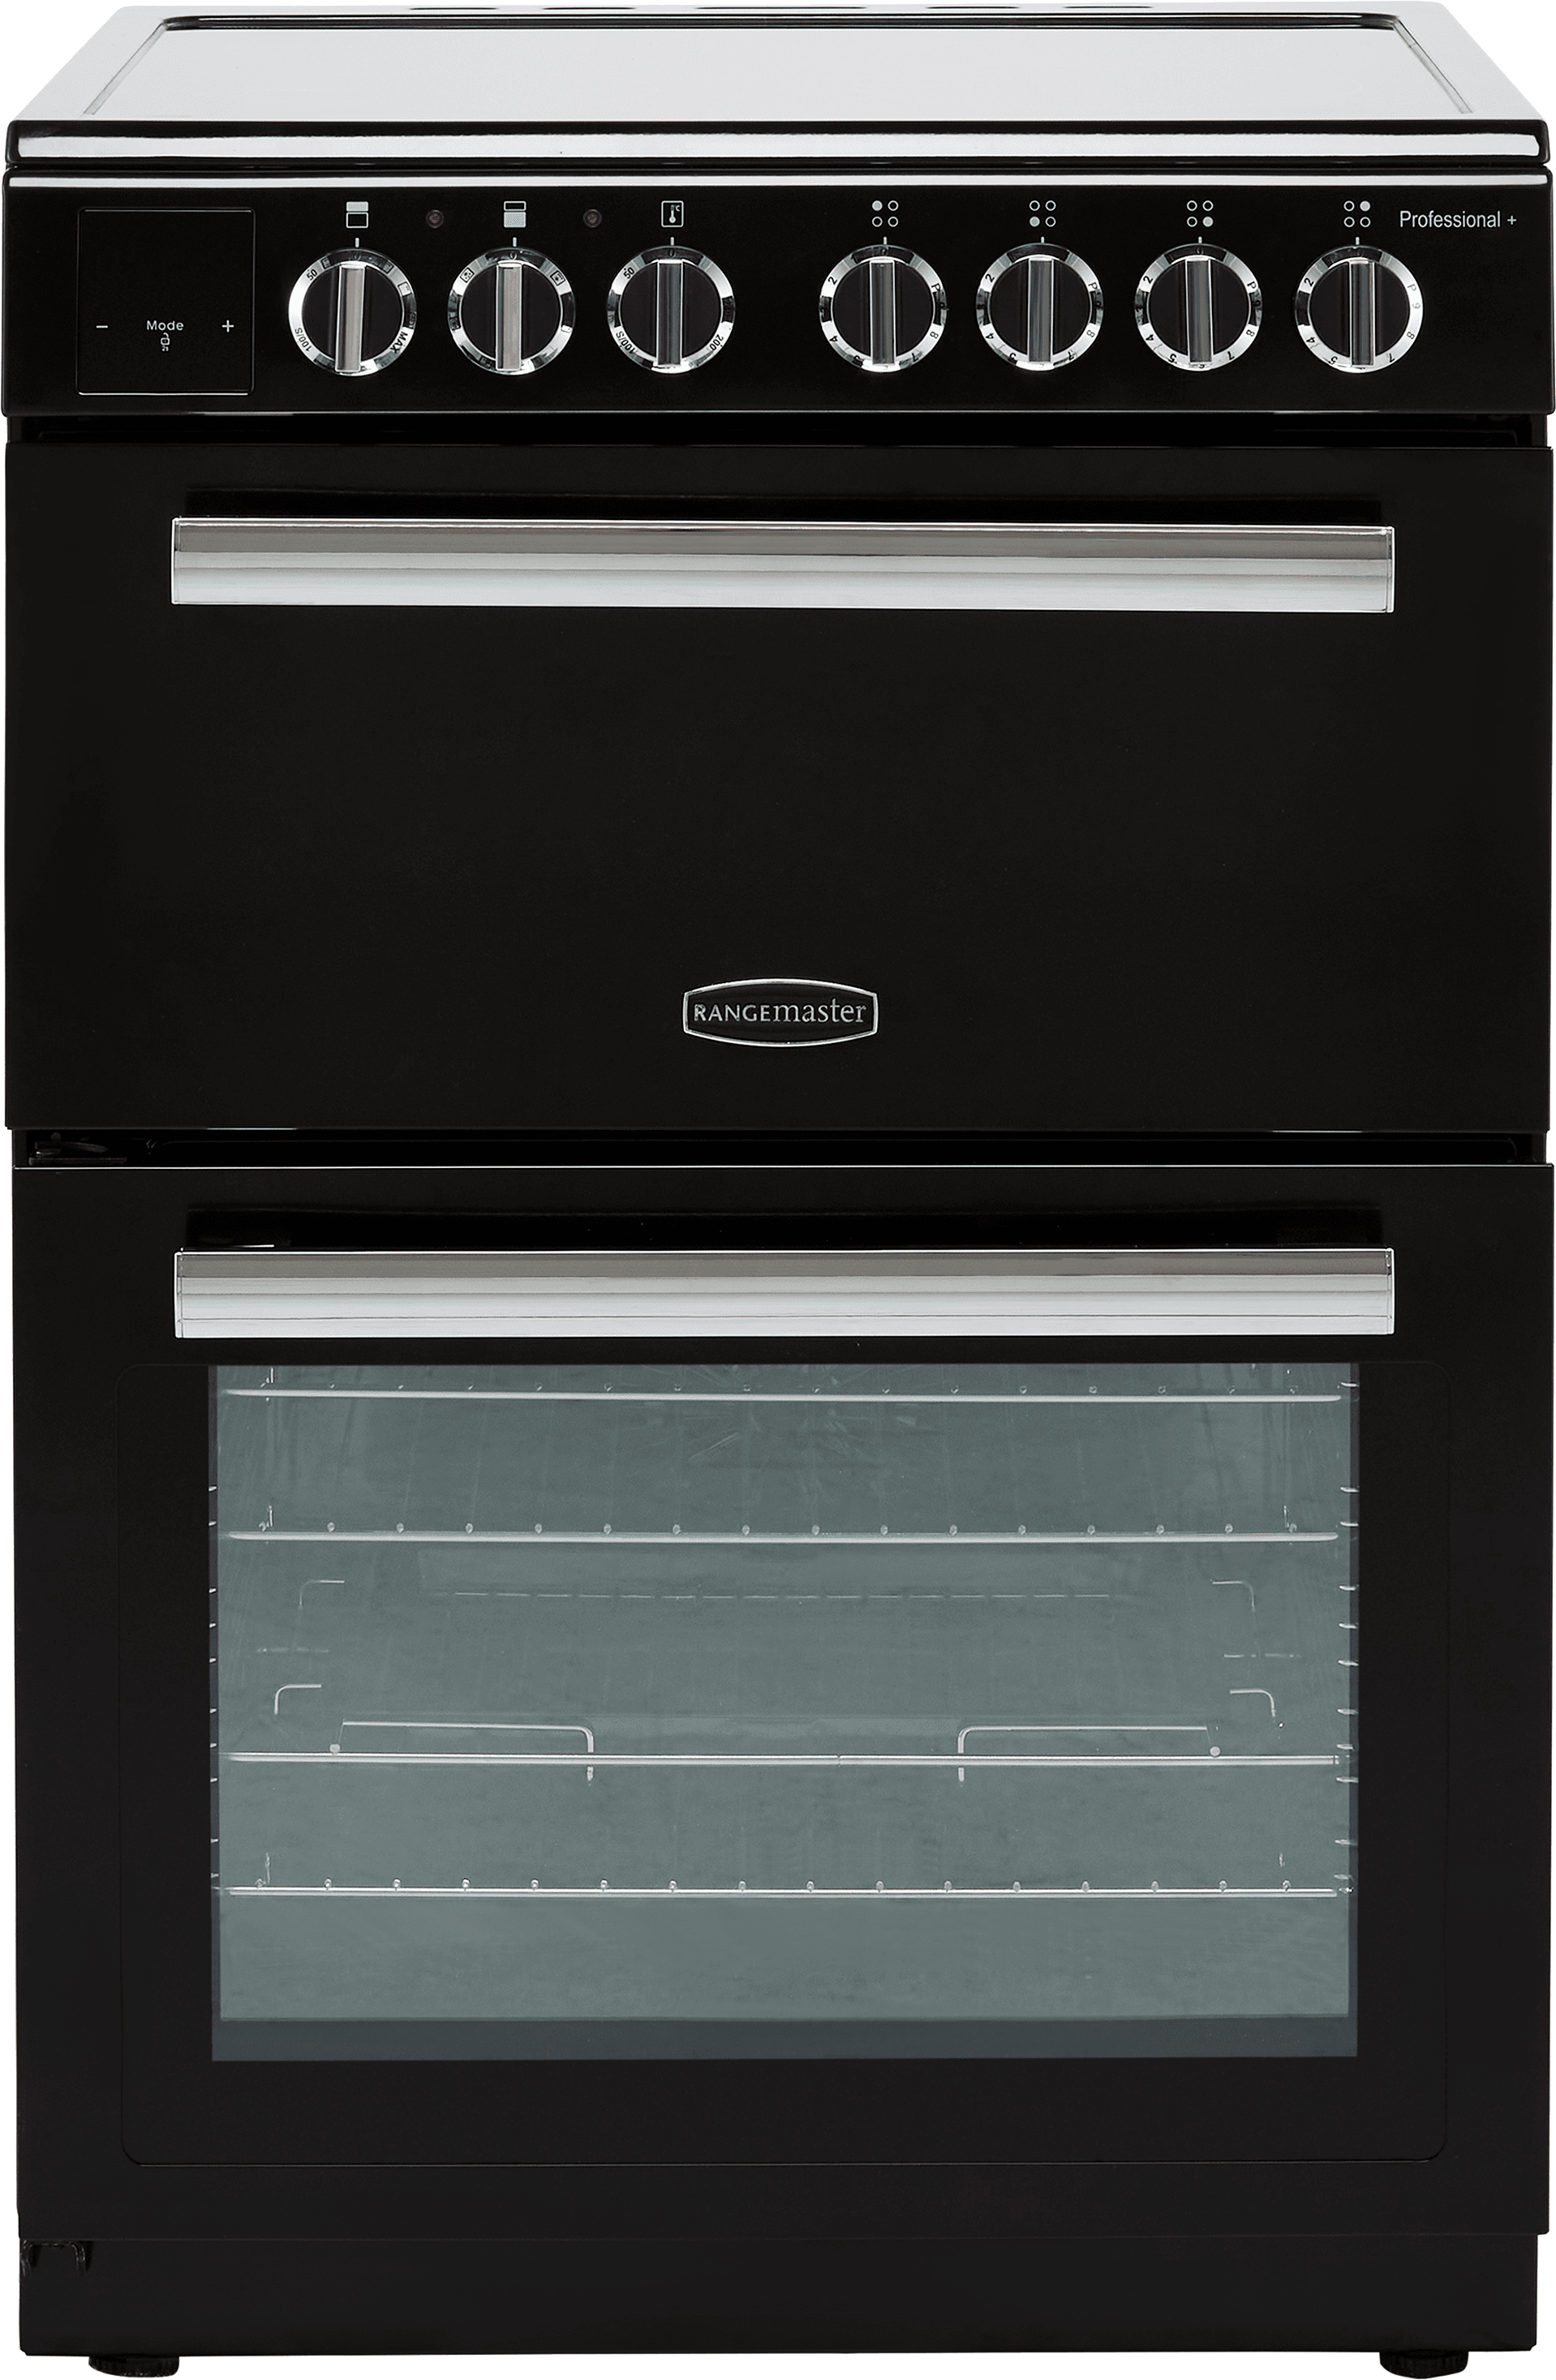 Rangemaster Professional Plus 60 PROPL60EIBL/C 60cm Electric Cooker with Induction Hob - Black / Chrome - A/A Rated, Black